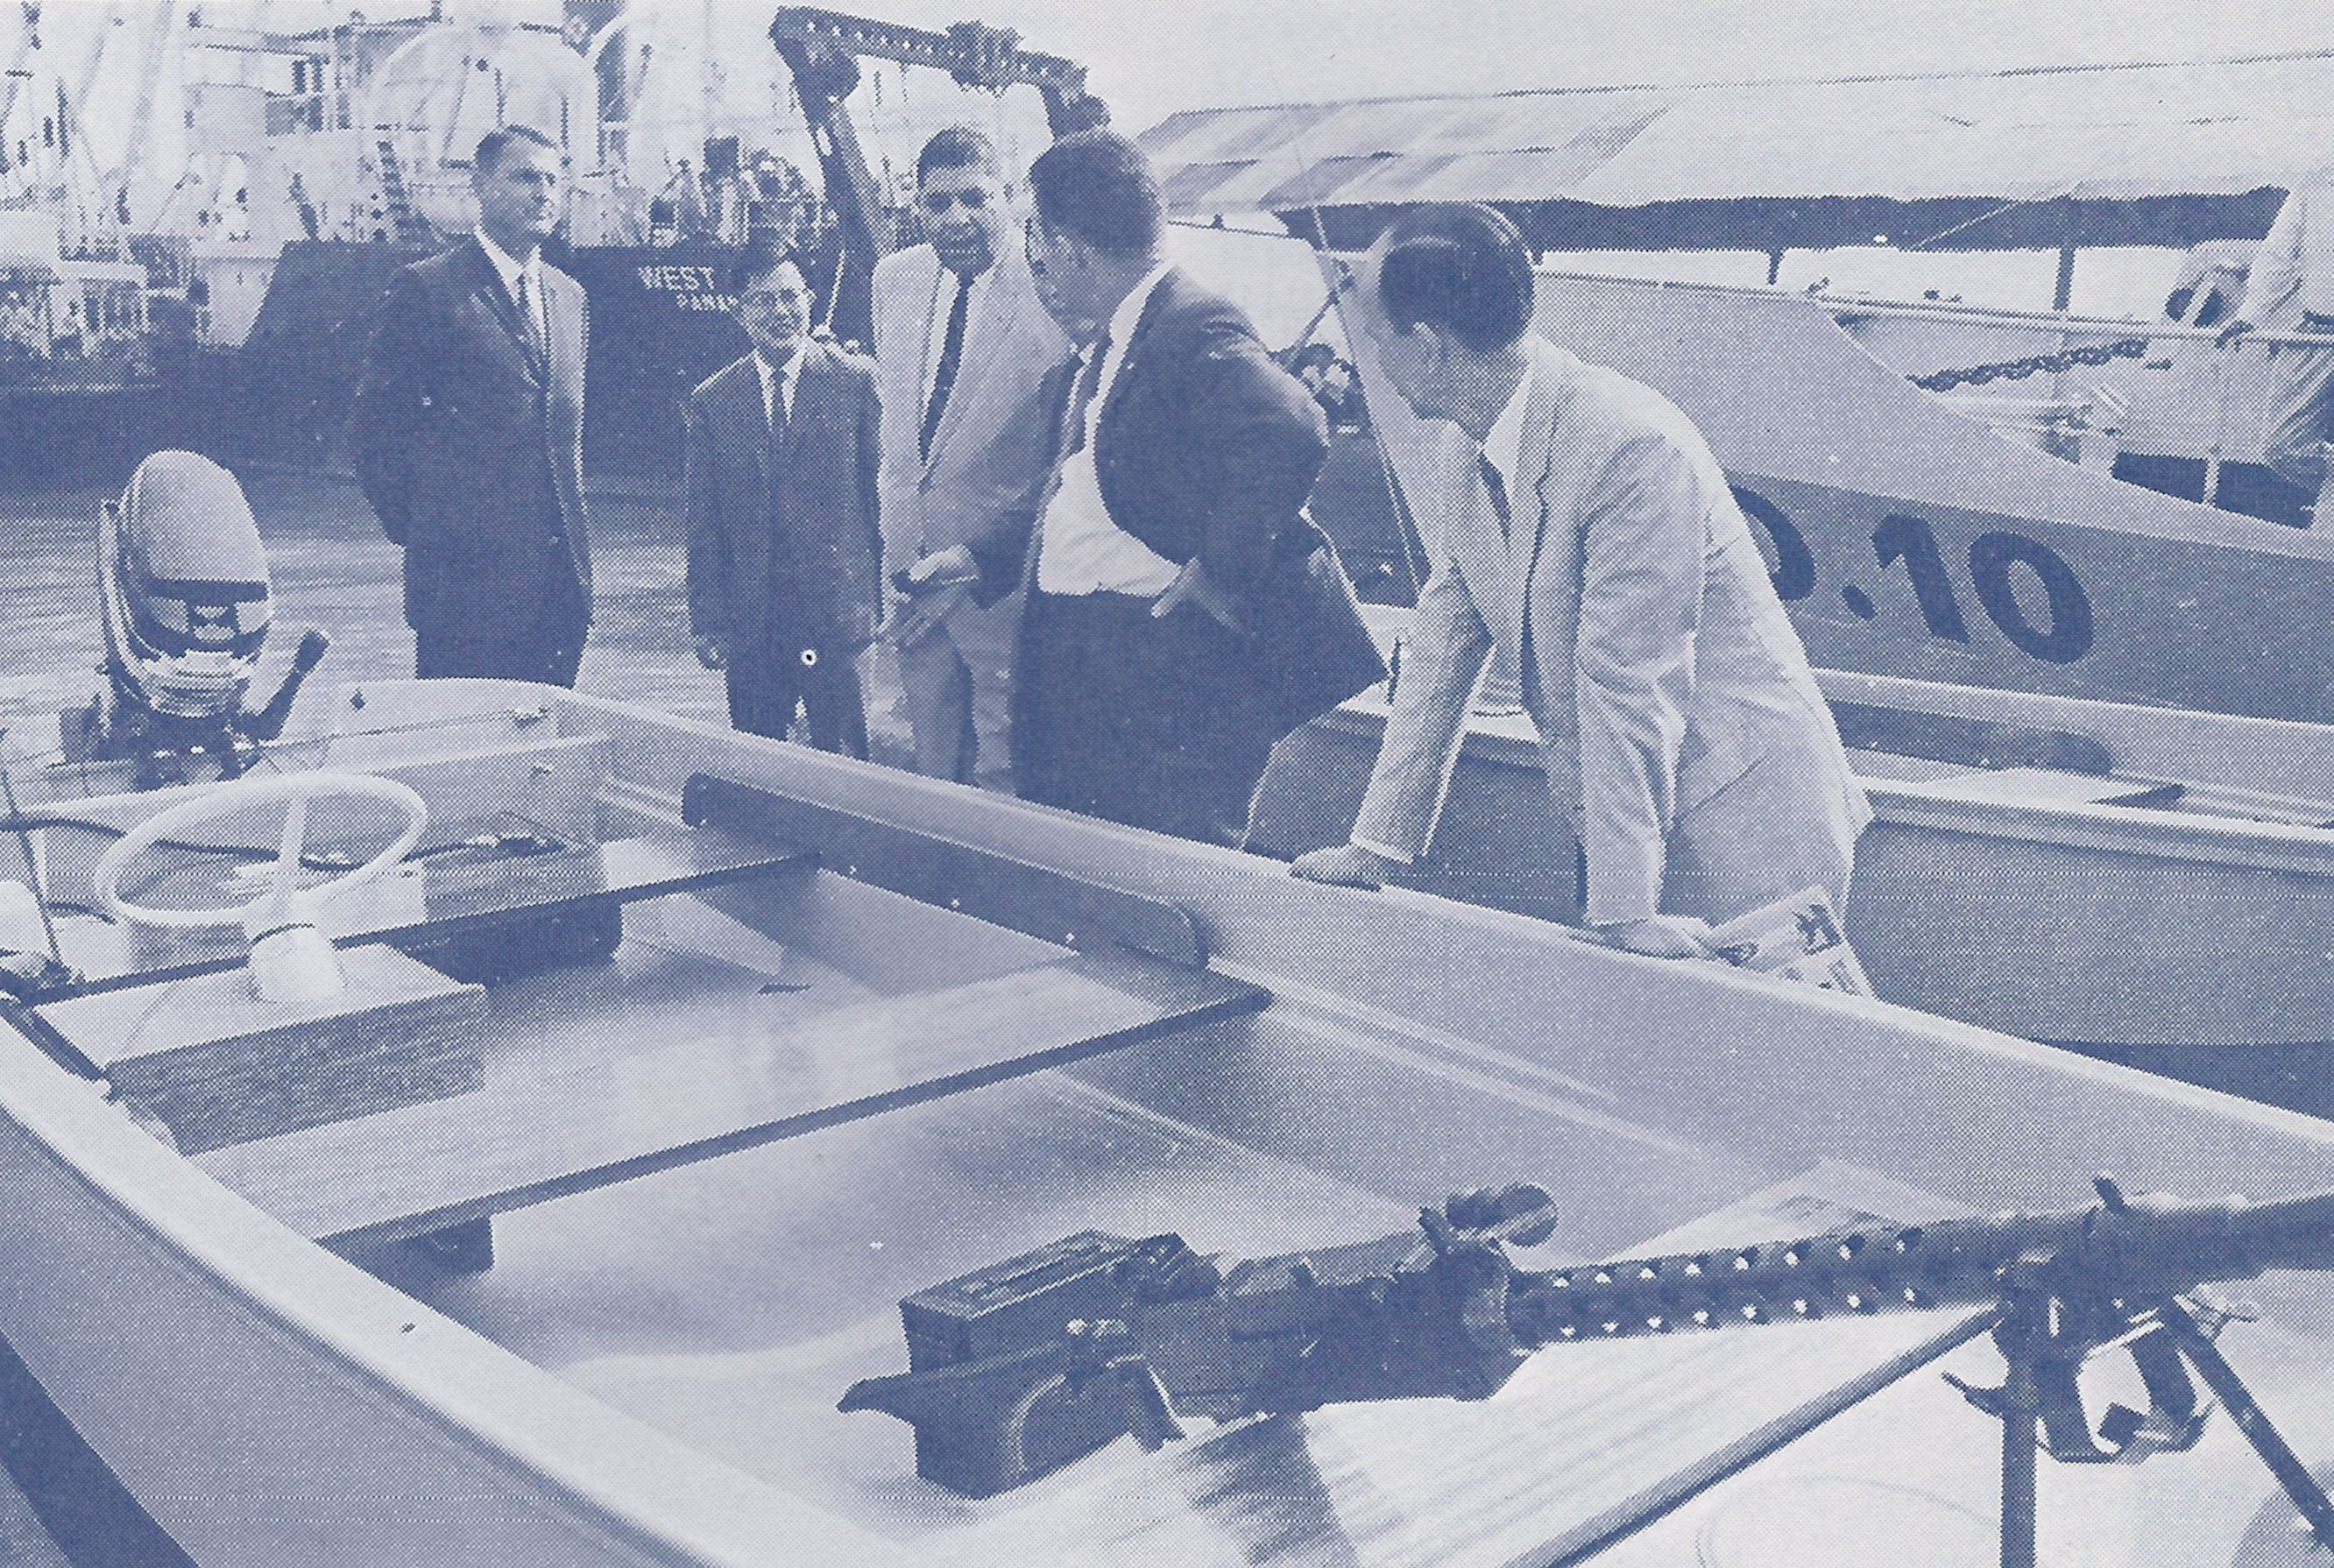 In Saigon, Nguyen Van Loc, director general of the Vietnamese Customs Directorate, leans upon one of 14 fast river patrol boats supplied to Vietnamese Customs by the U.S. Agency for International Development (USAID). Donald G. MacDonald, USAID director to Vietnam; Tran Van Kien, minister of finance; Alexander R. Honoré, U.S. Customs advisor; Le Xuan Long, captain of the customs service boat fleet and an unidentified USAID advisor look on. (Customs Today, January 1967)